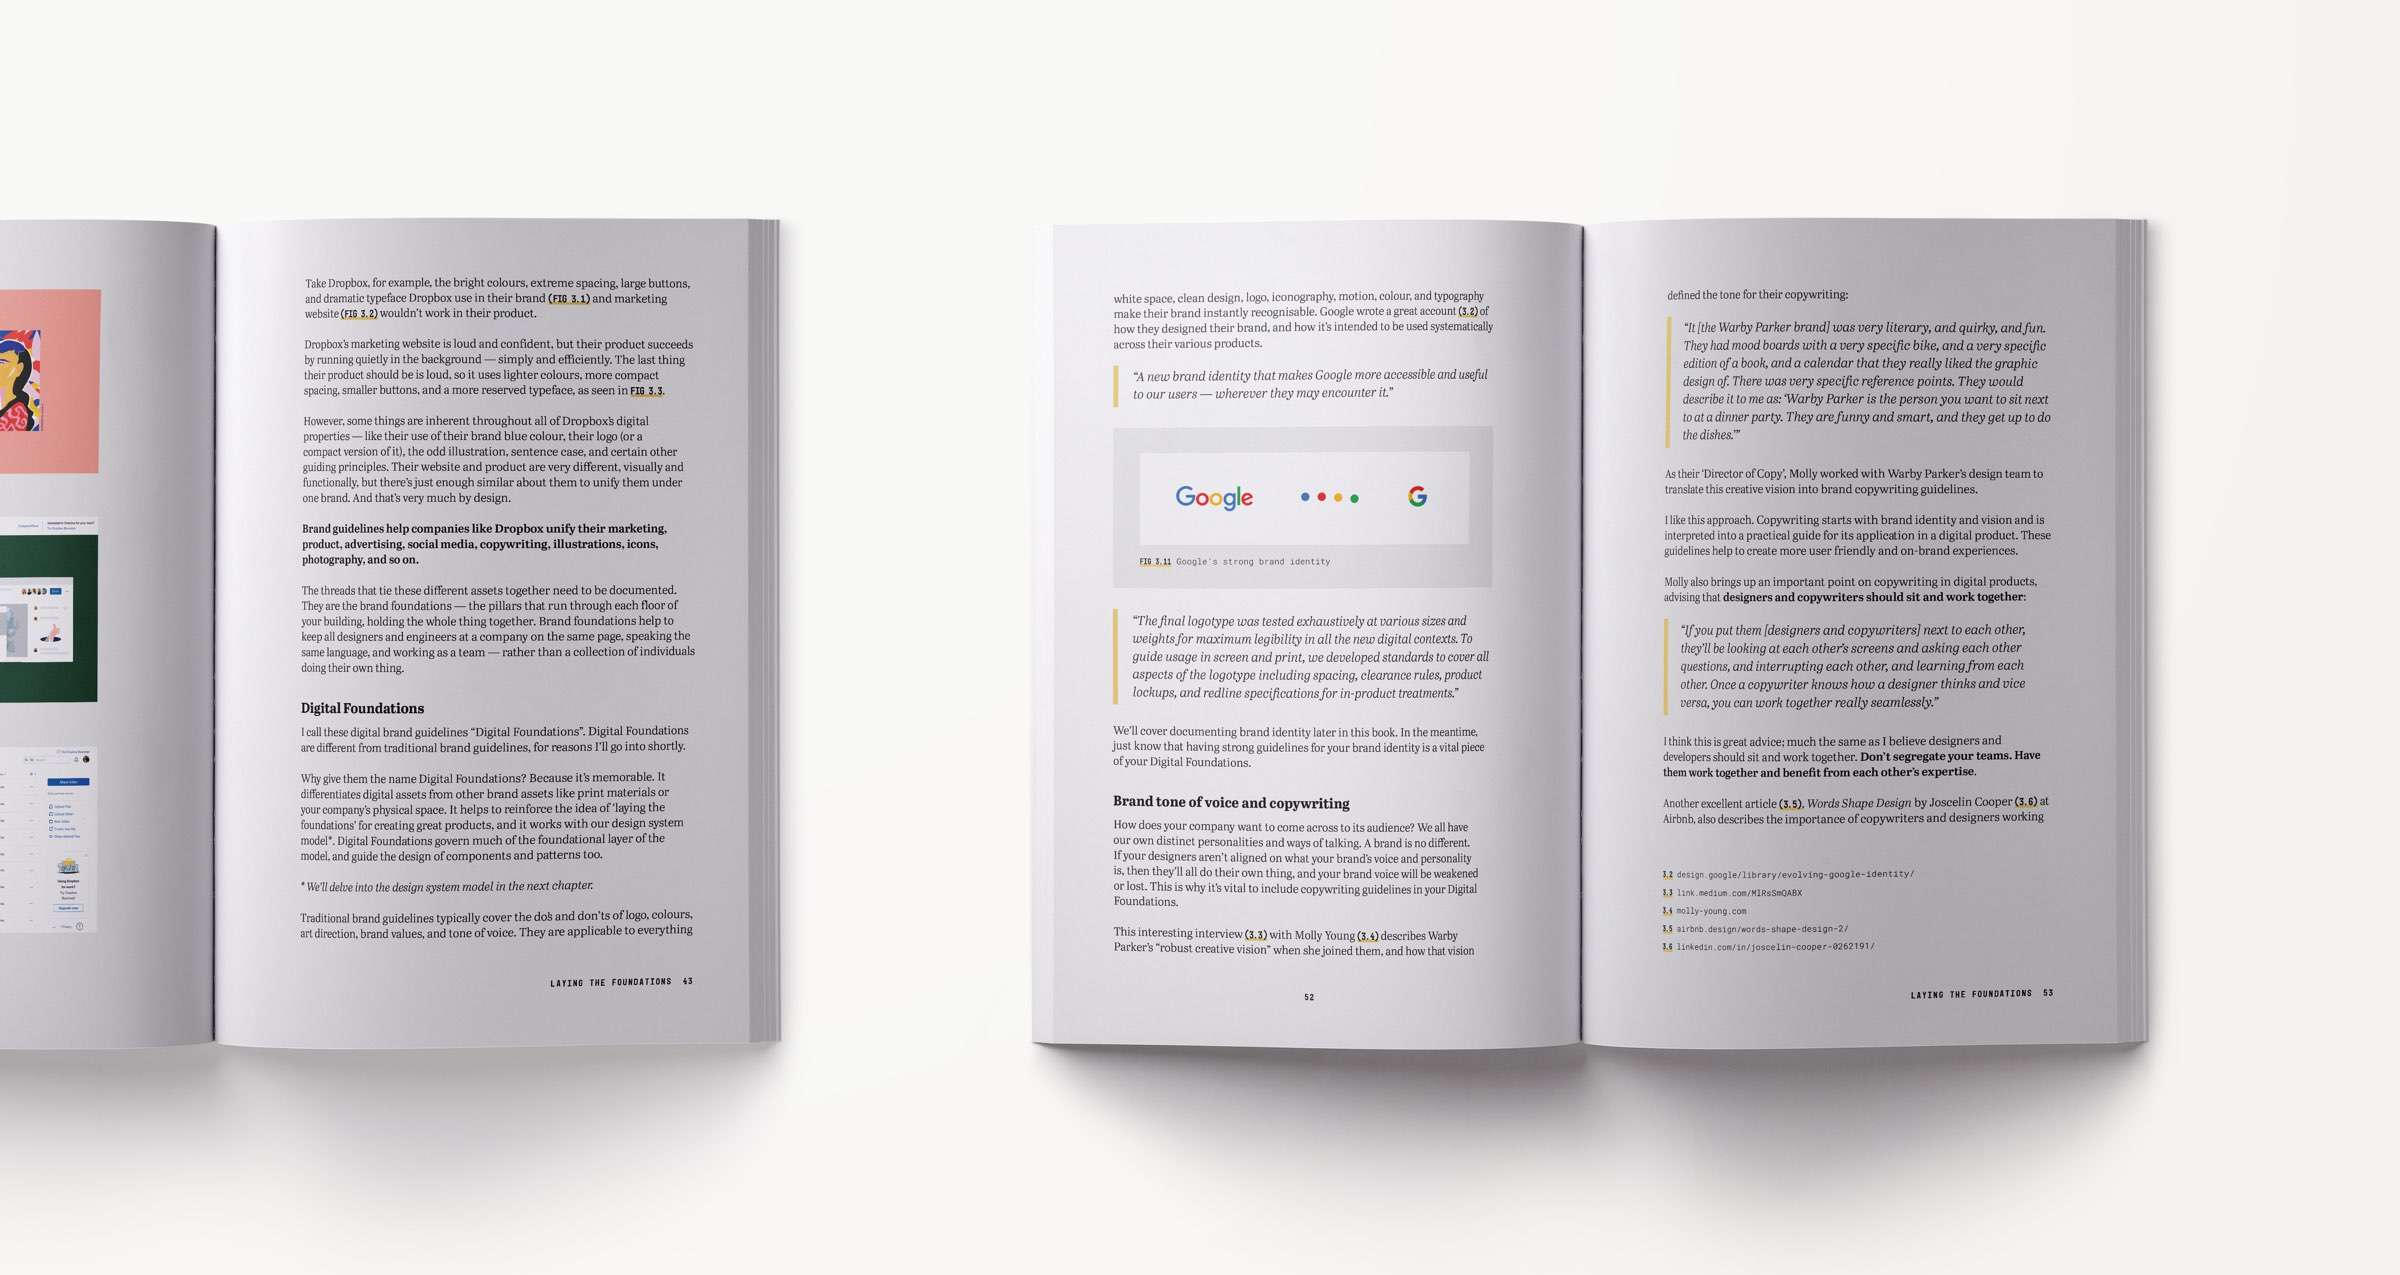 A design systems book spread showing content related to creating digital brand guidelines including brand tone of voice and copywriting